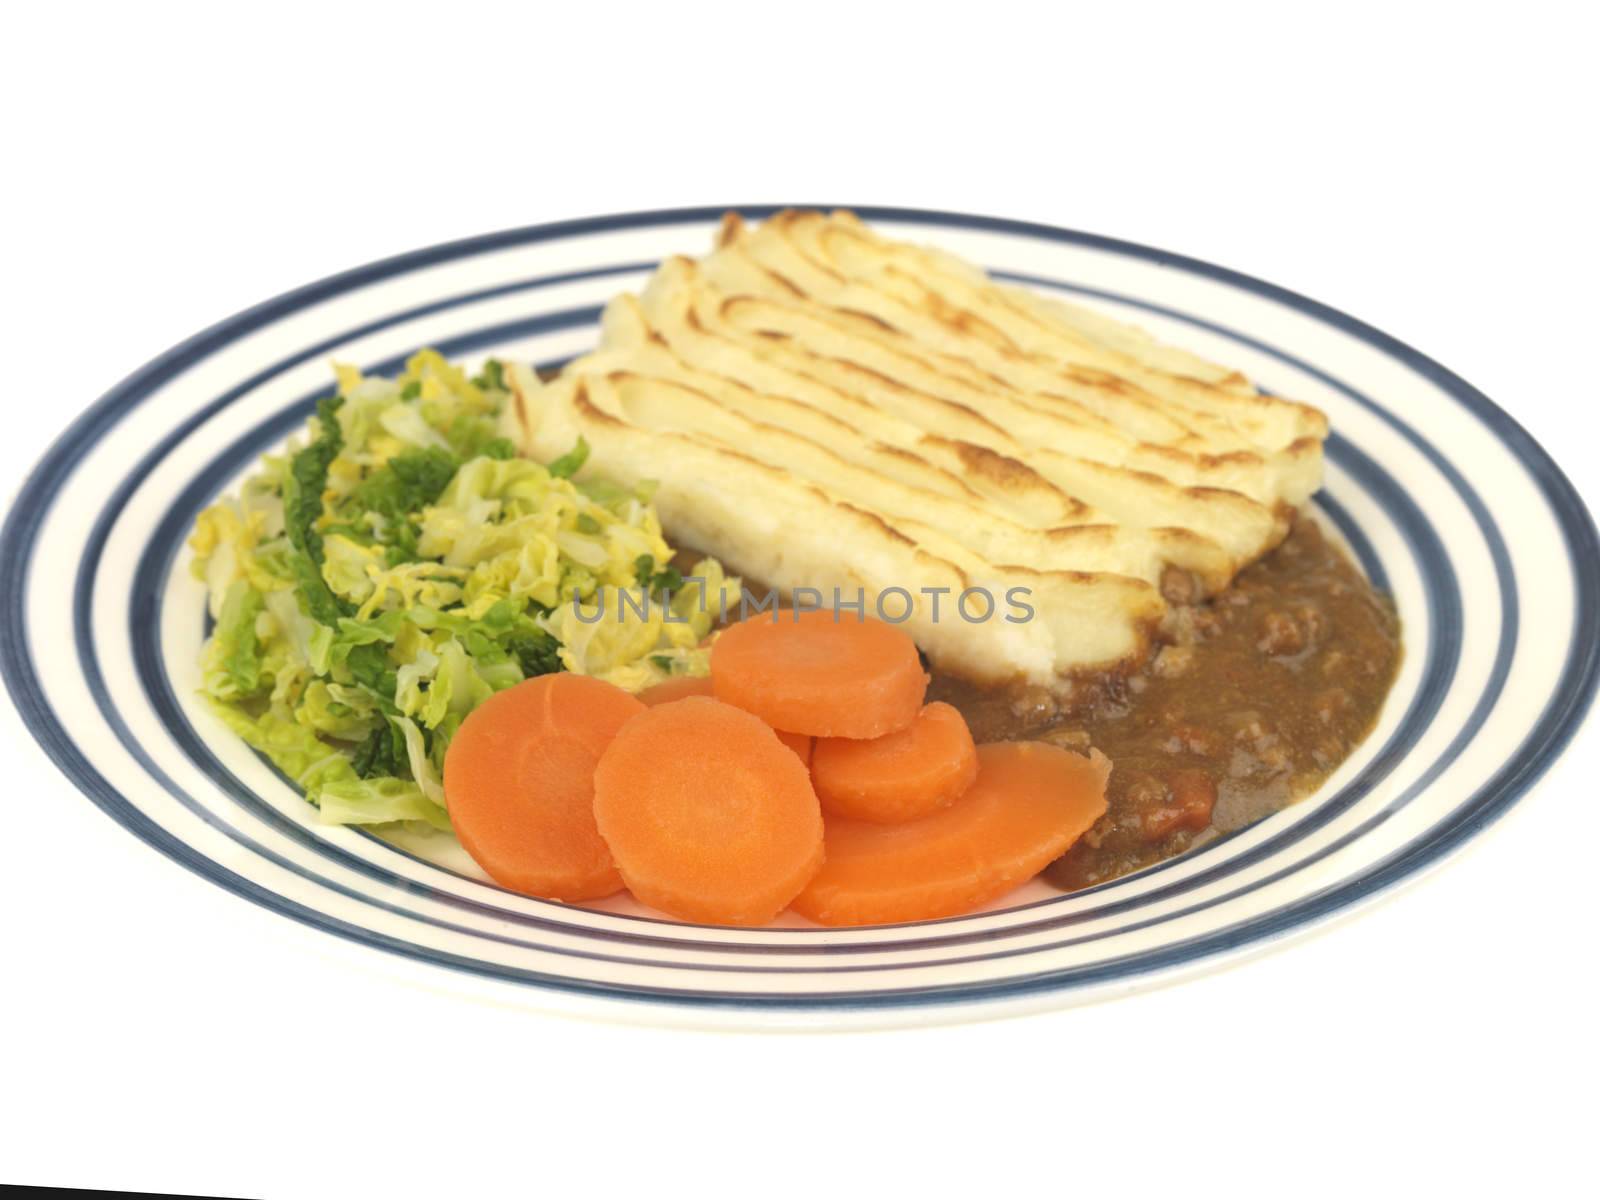 Shepherds Pie with Vegetables by Whiteboxmedia